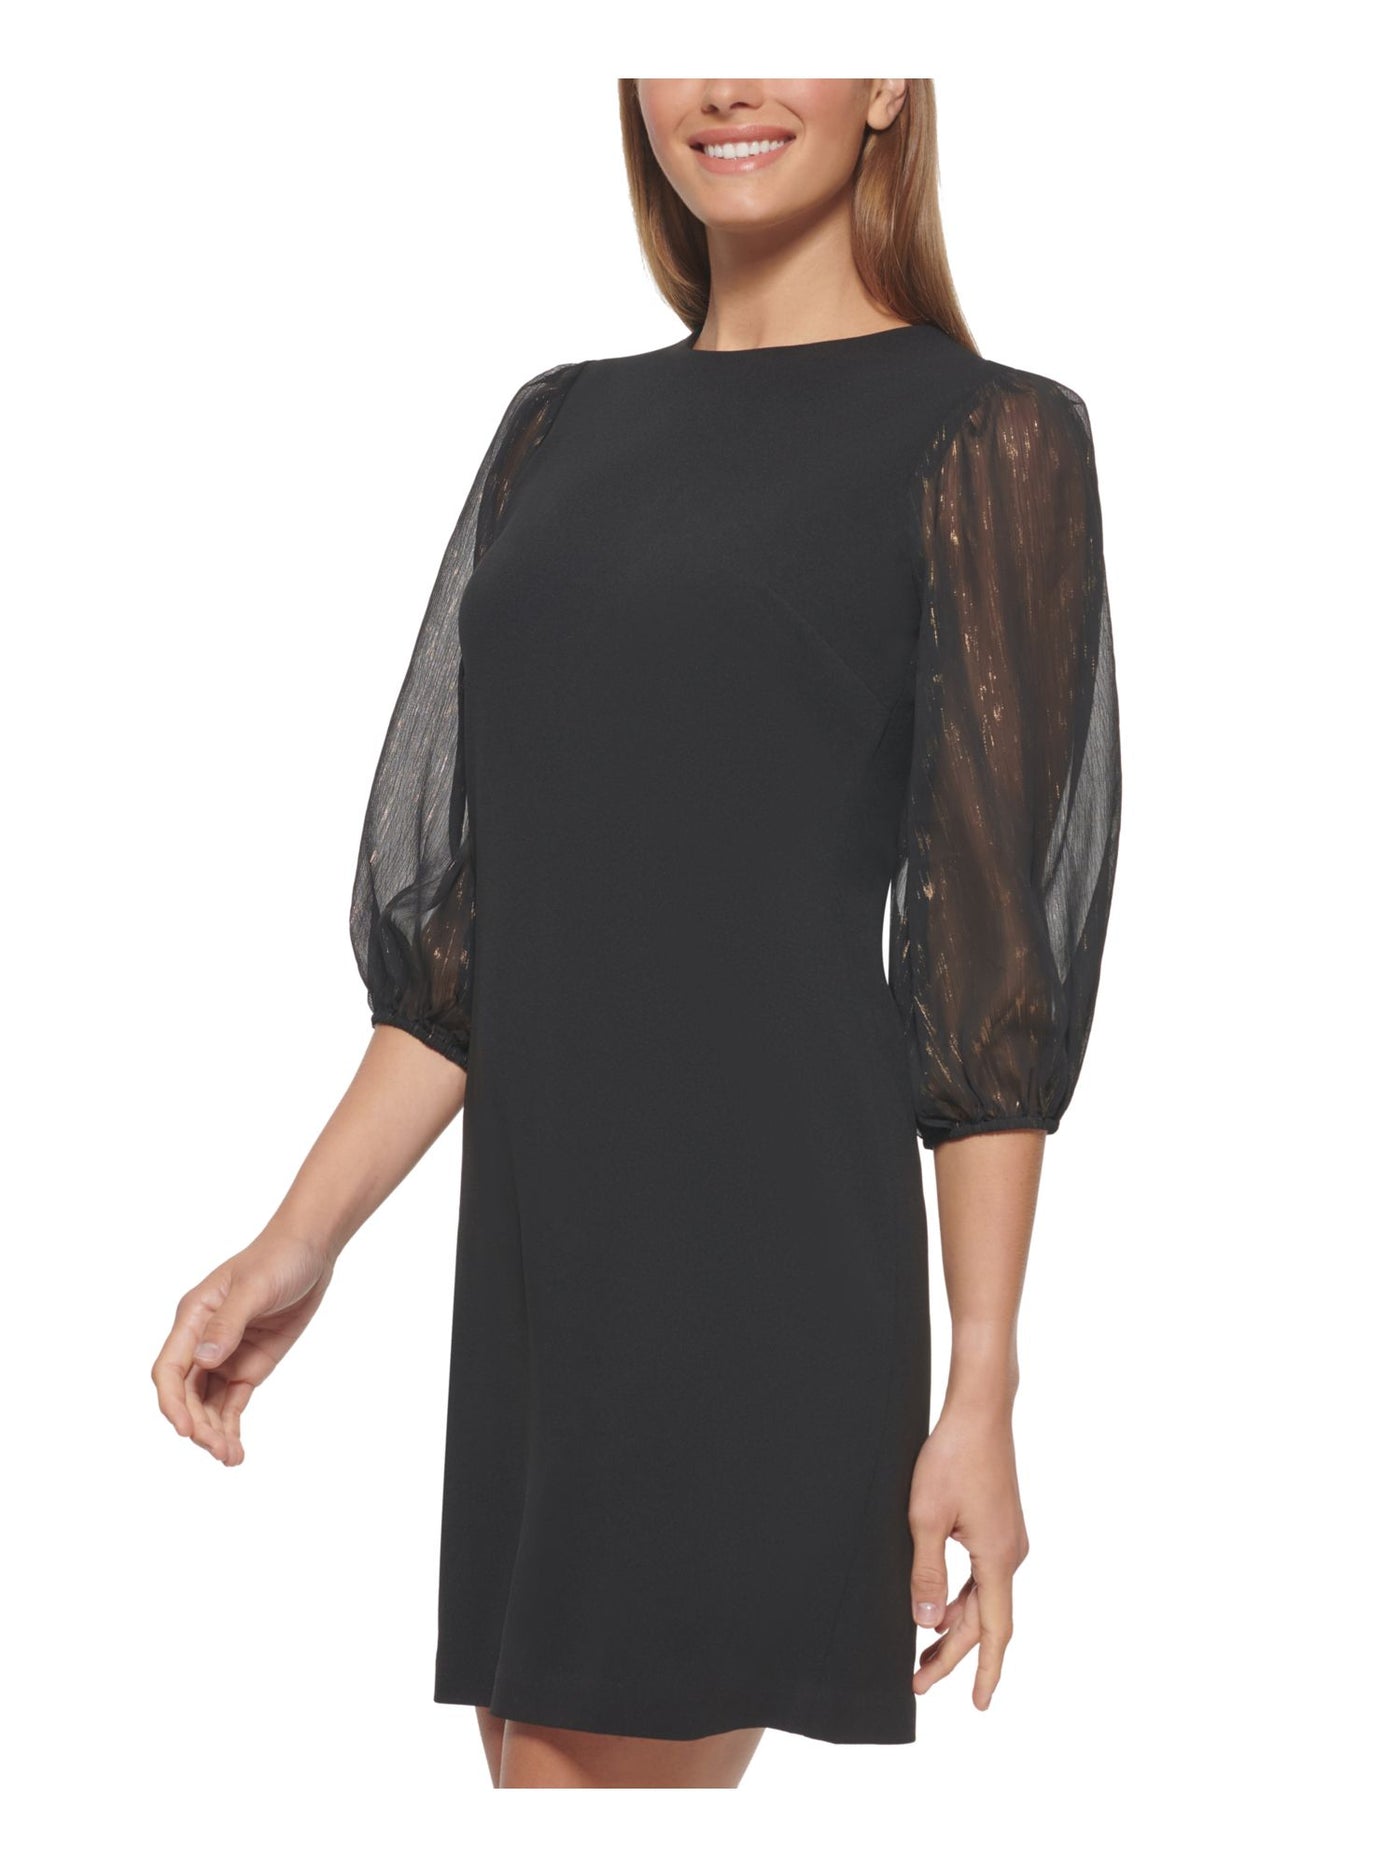 DKNY Womens Metallic Sheer Zippered 3/4 Sleeve Round Neck Above The Knee Cocktail Shift Dress